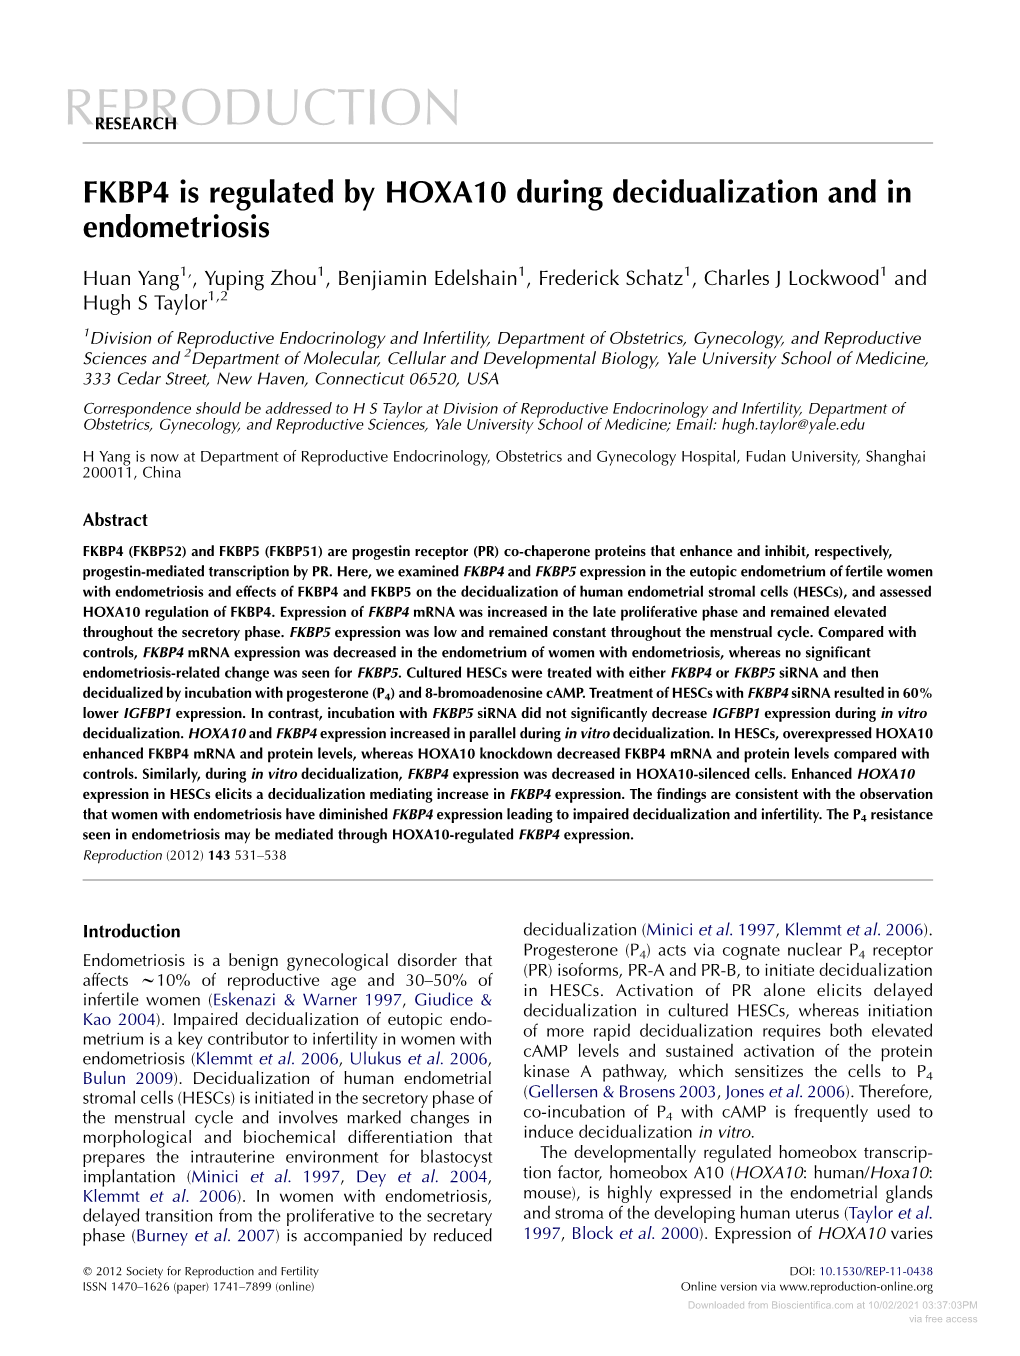 FKBP4 Is Regulated by HOXA10 During Decidualization and in Endometriosis